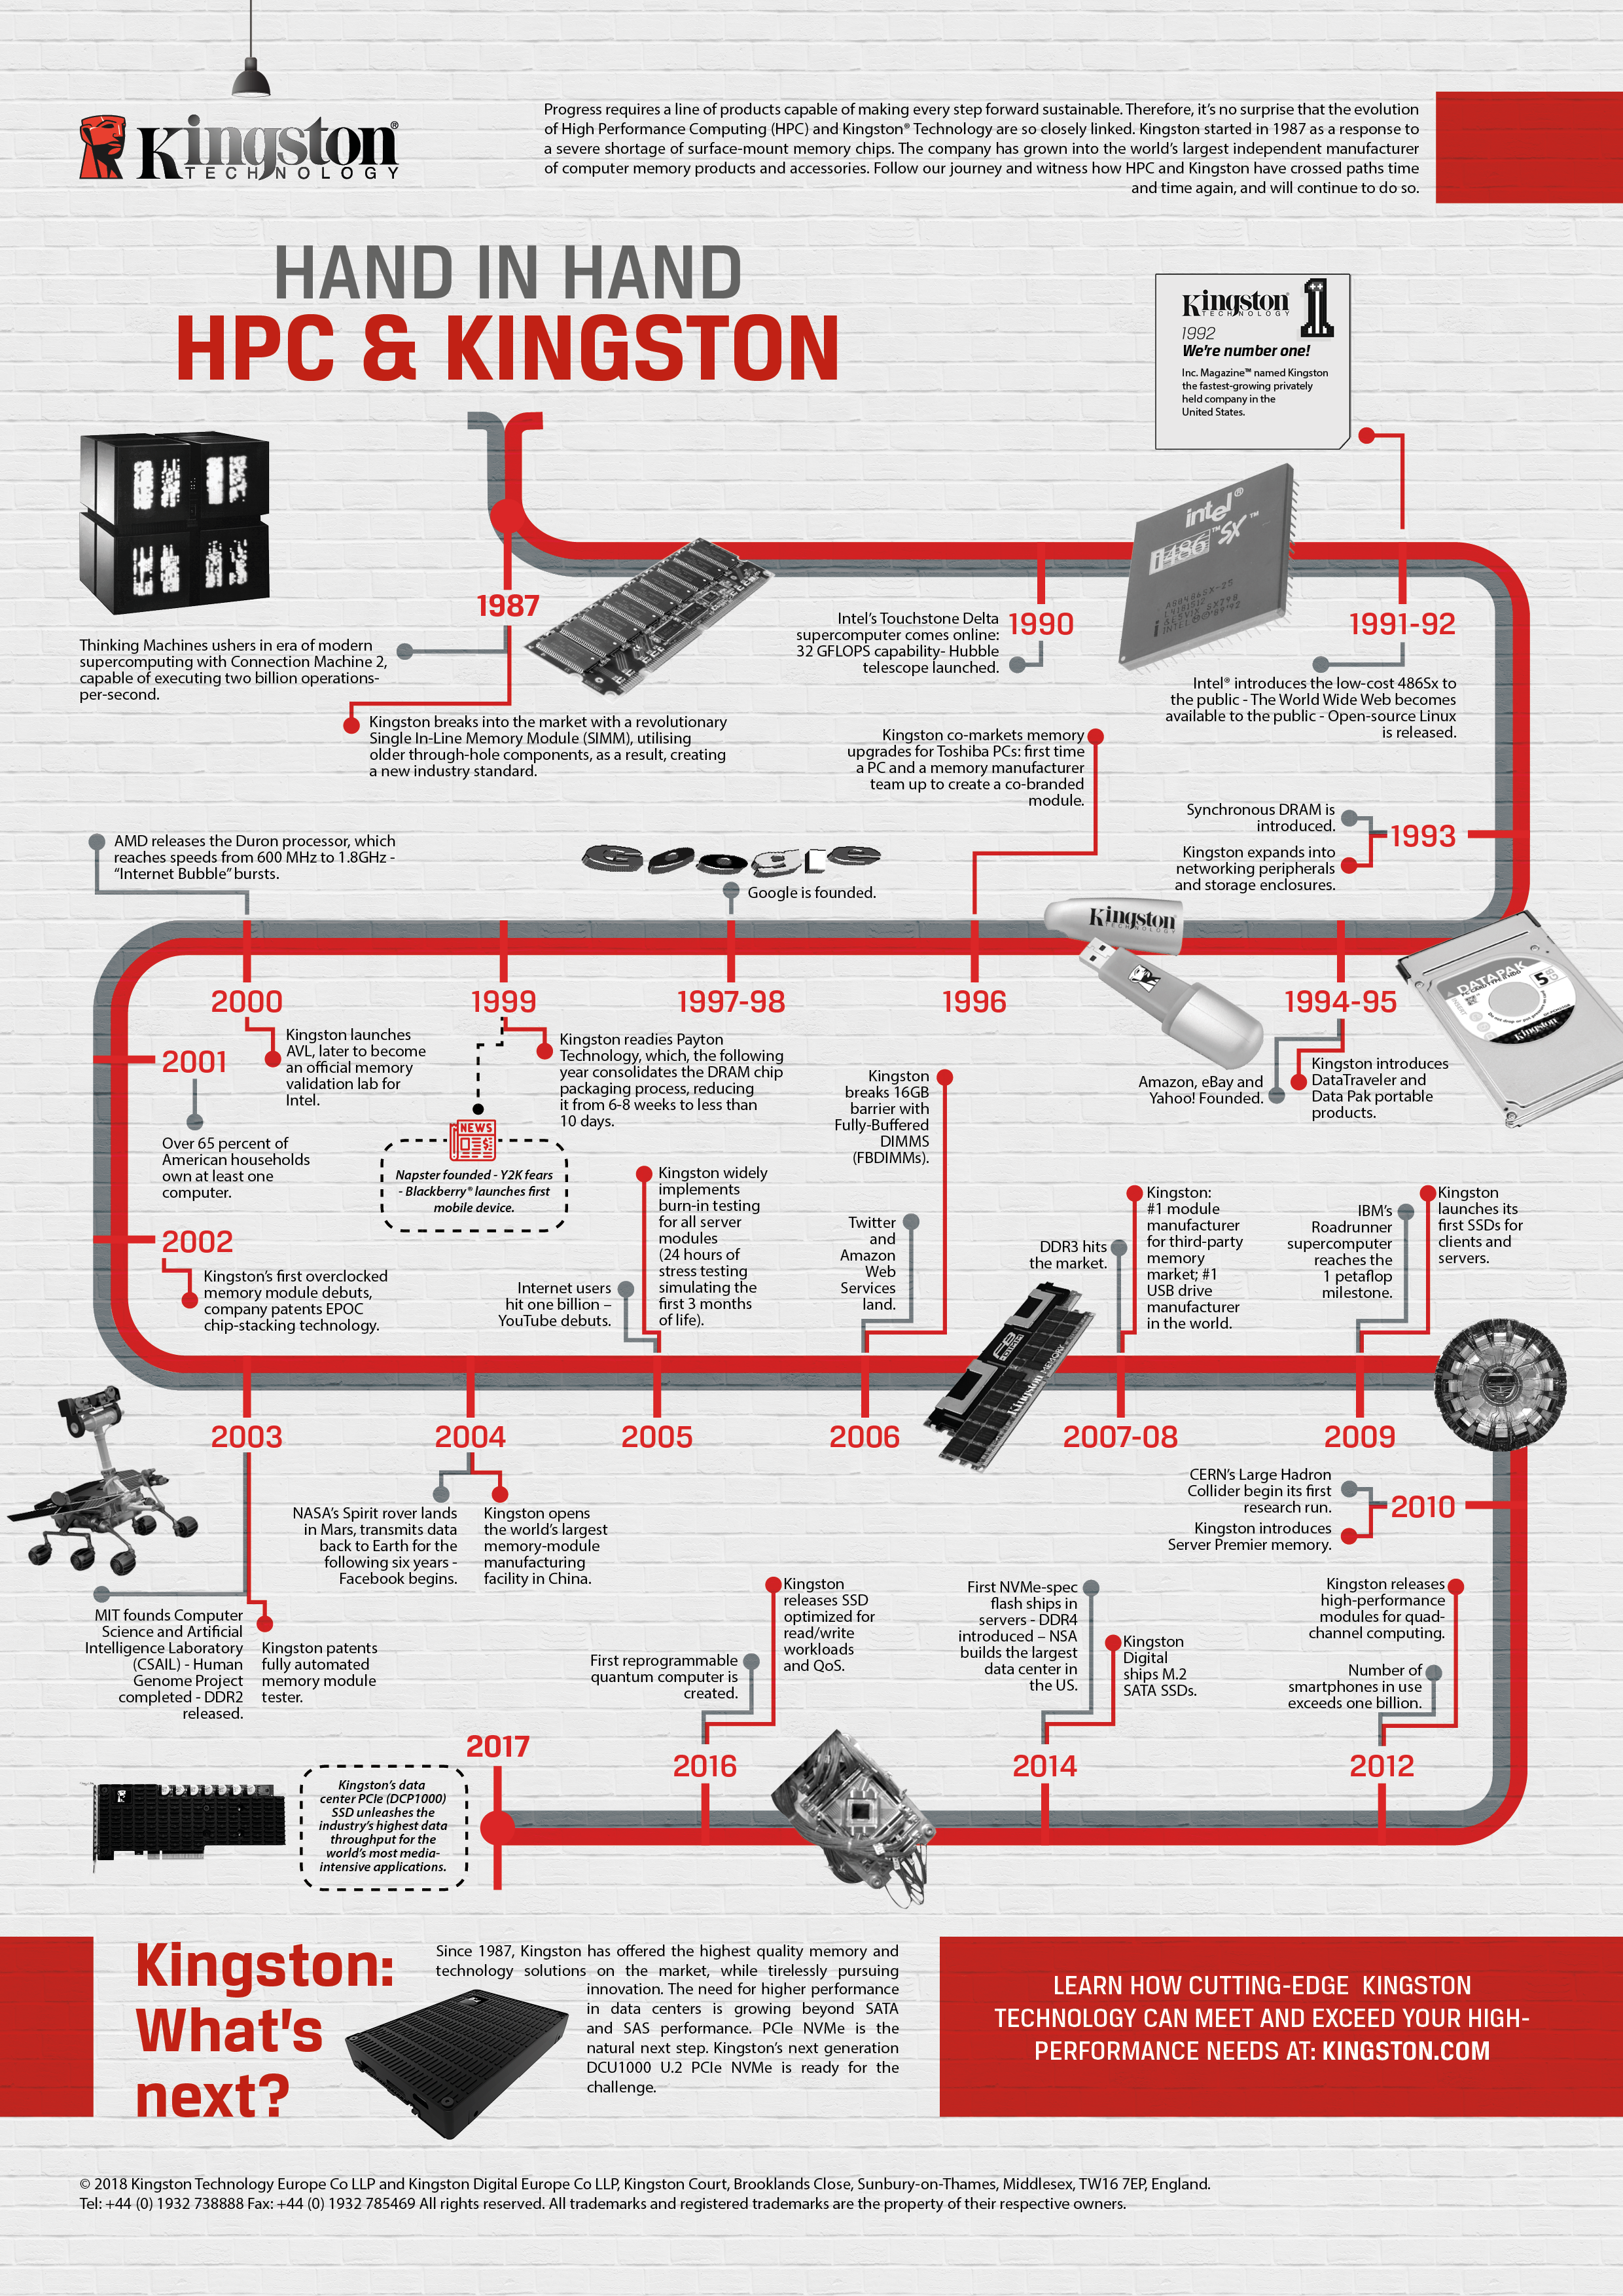 HPC and Kingston: 30 Years of Cutting-Edge Technology